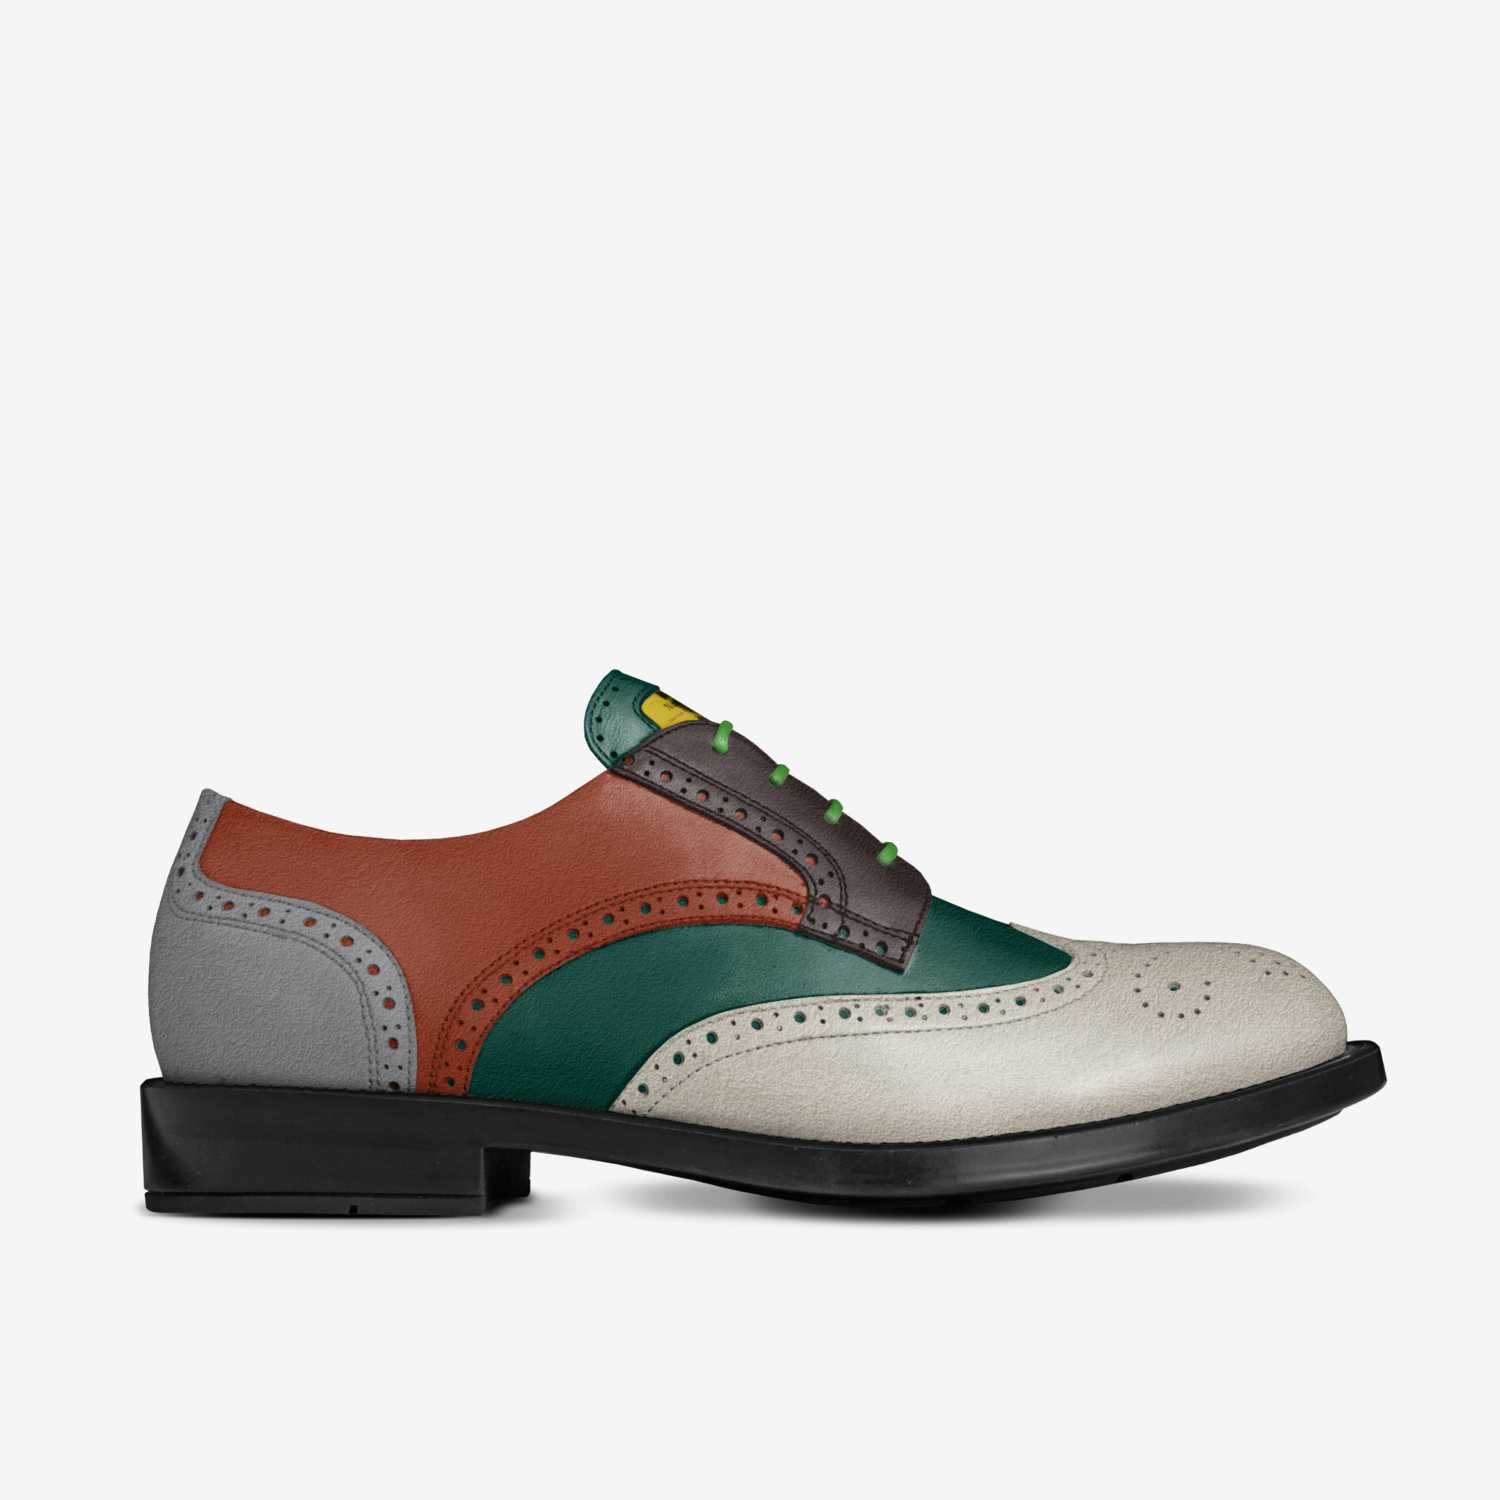 Nicbhoy custom made in Italy shoes by Nicholas Lamb | Side view